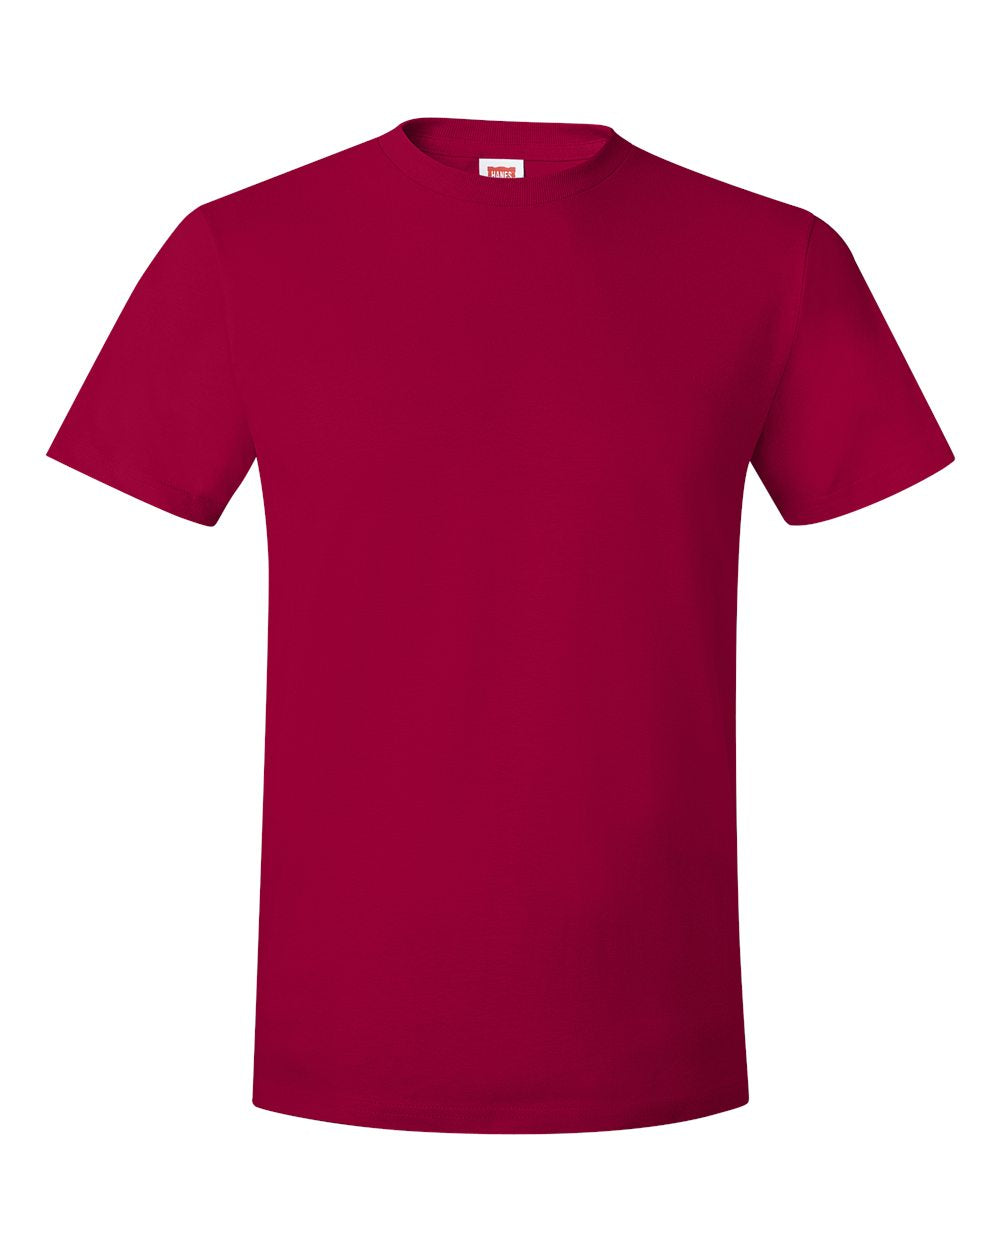 Pretreated Hanes 4980 Perfect-T T-Shirt